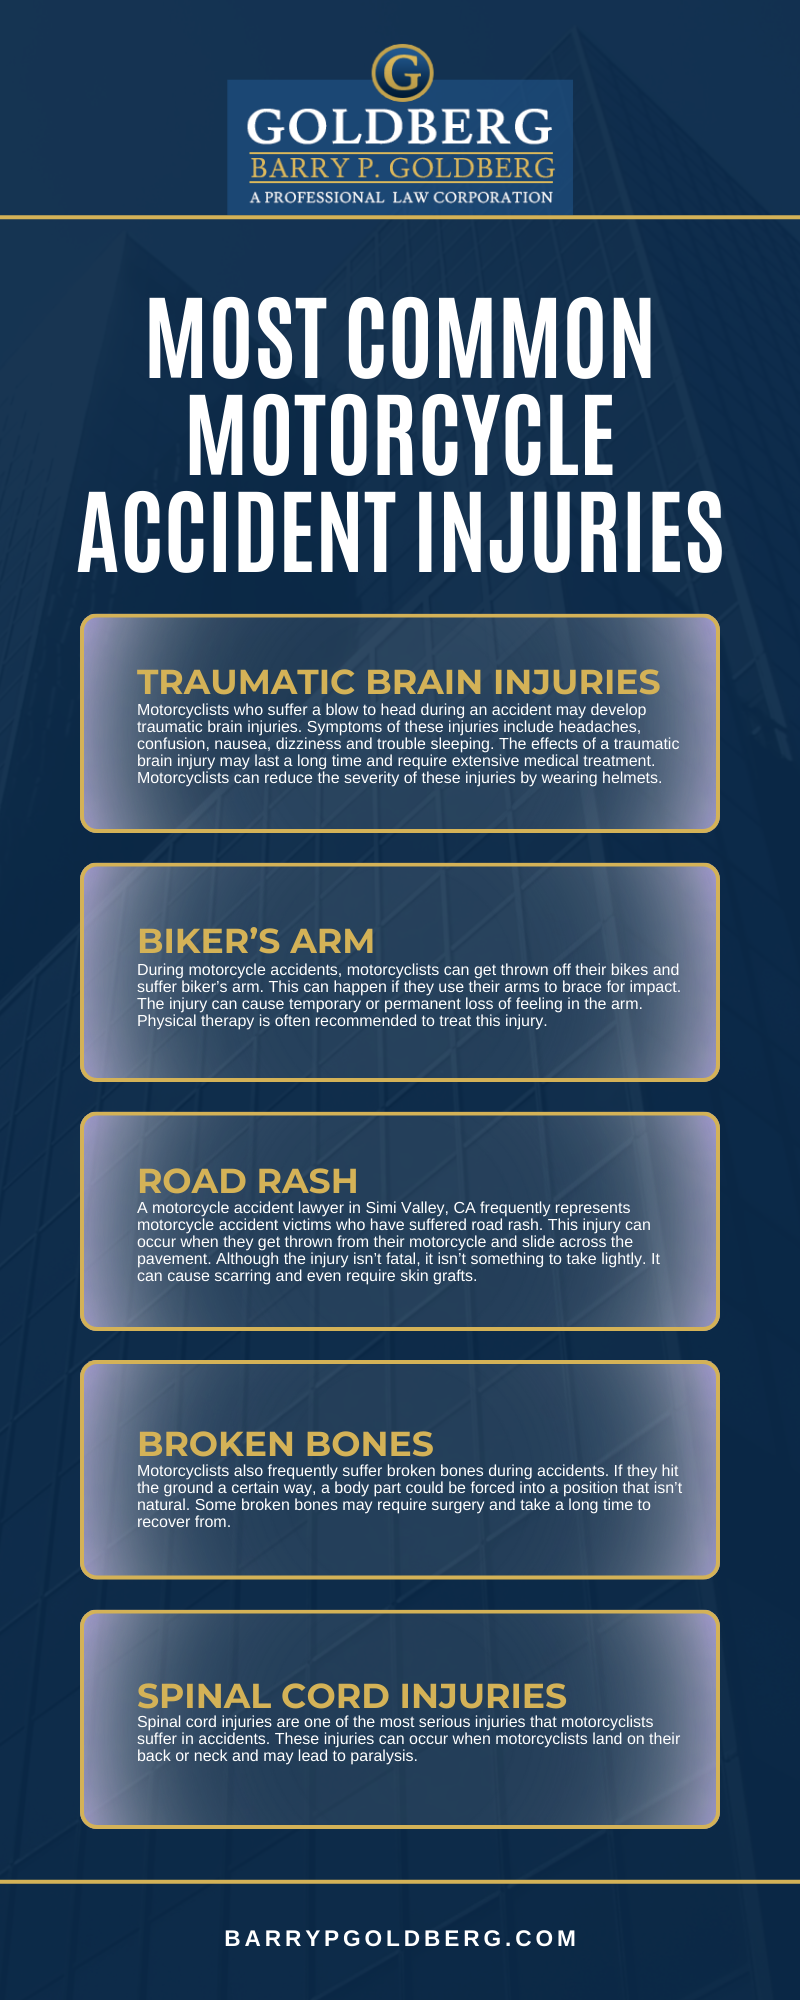 Most Common Motorcycle Accident Injuries Infographic